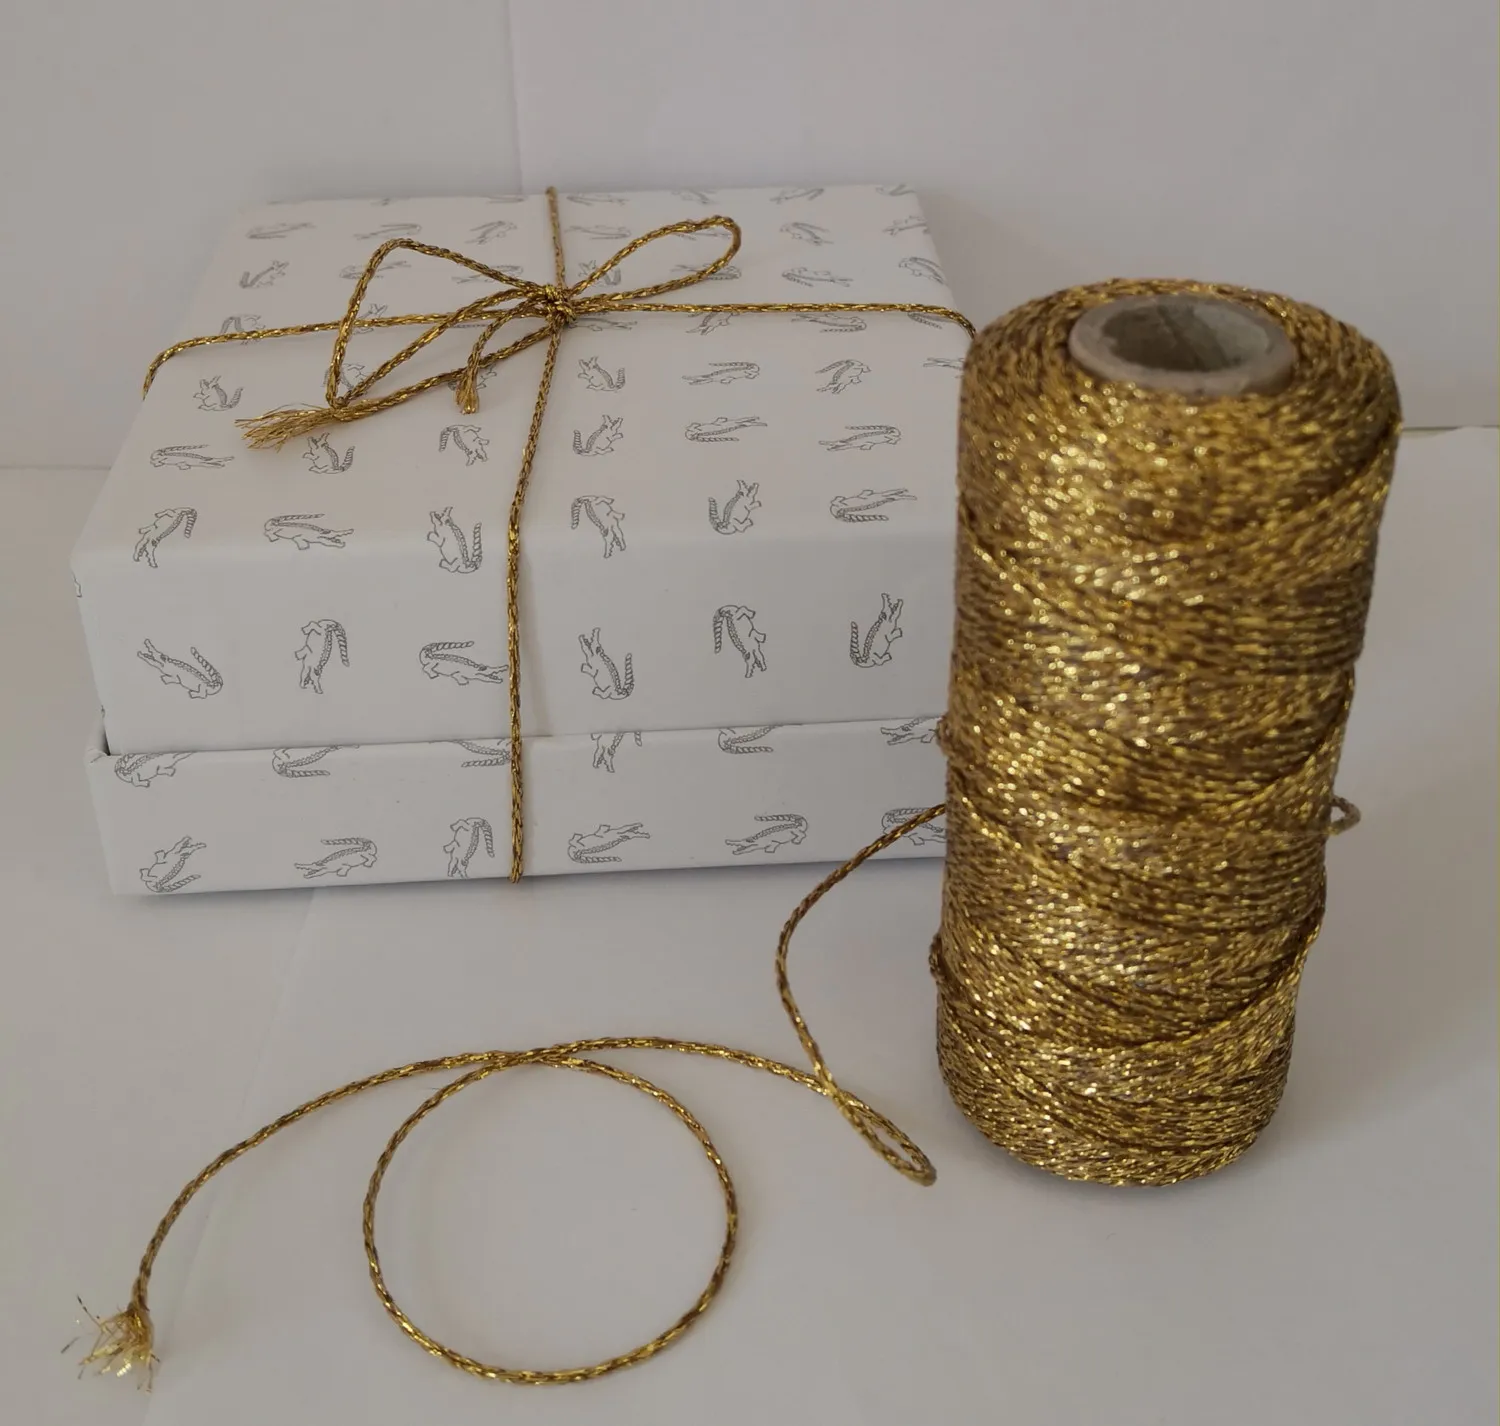 100M solid metallic sliver gold copper twine,bakers twine,metallic rope